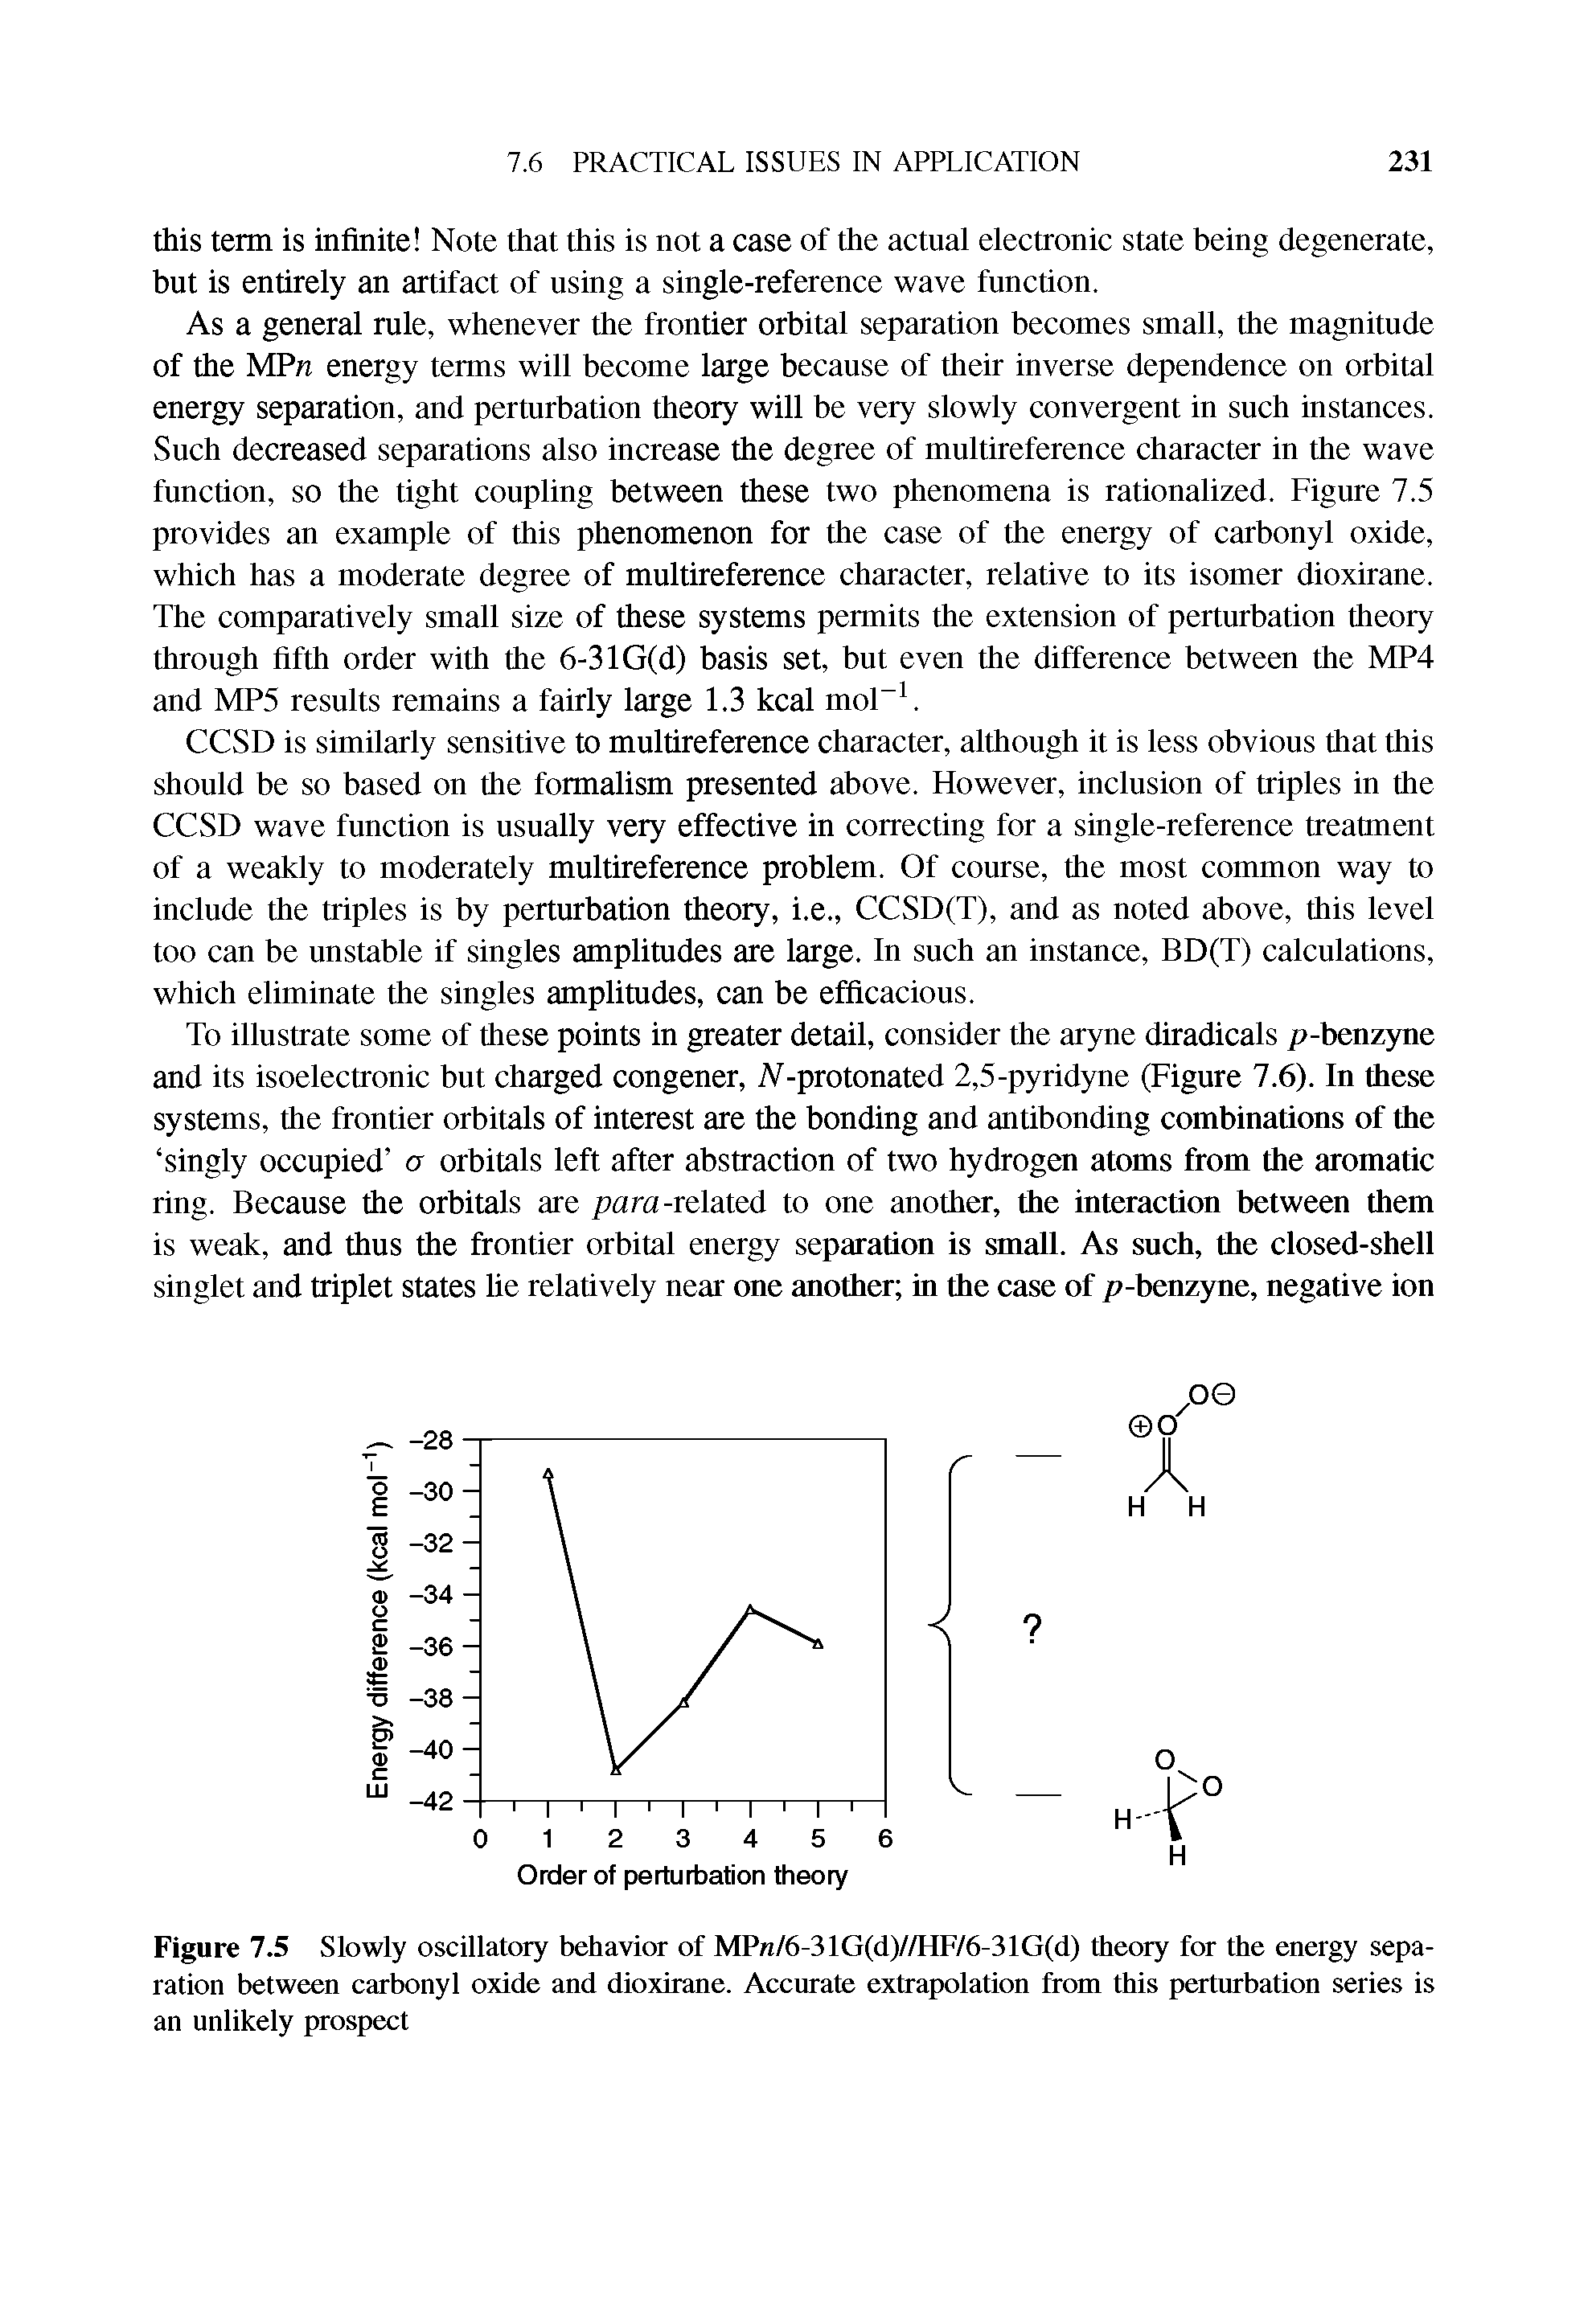 Figure 7.5 Slowly oscillatory behavior of MP /6-31G(d)//HF/6-31G(d) theory for the energy separation between carbonyl oxide and dioxirane. Accurate extrapolation from this perturbation series is an unlikely prospect...